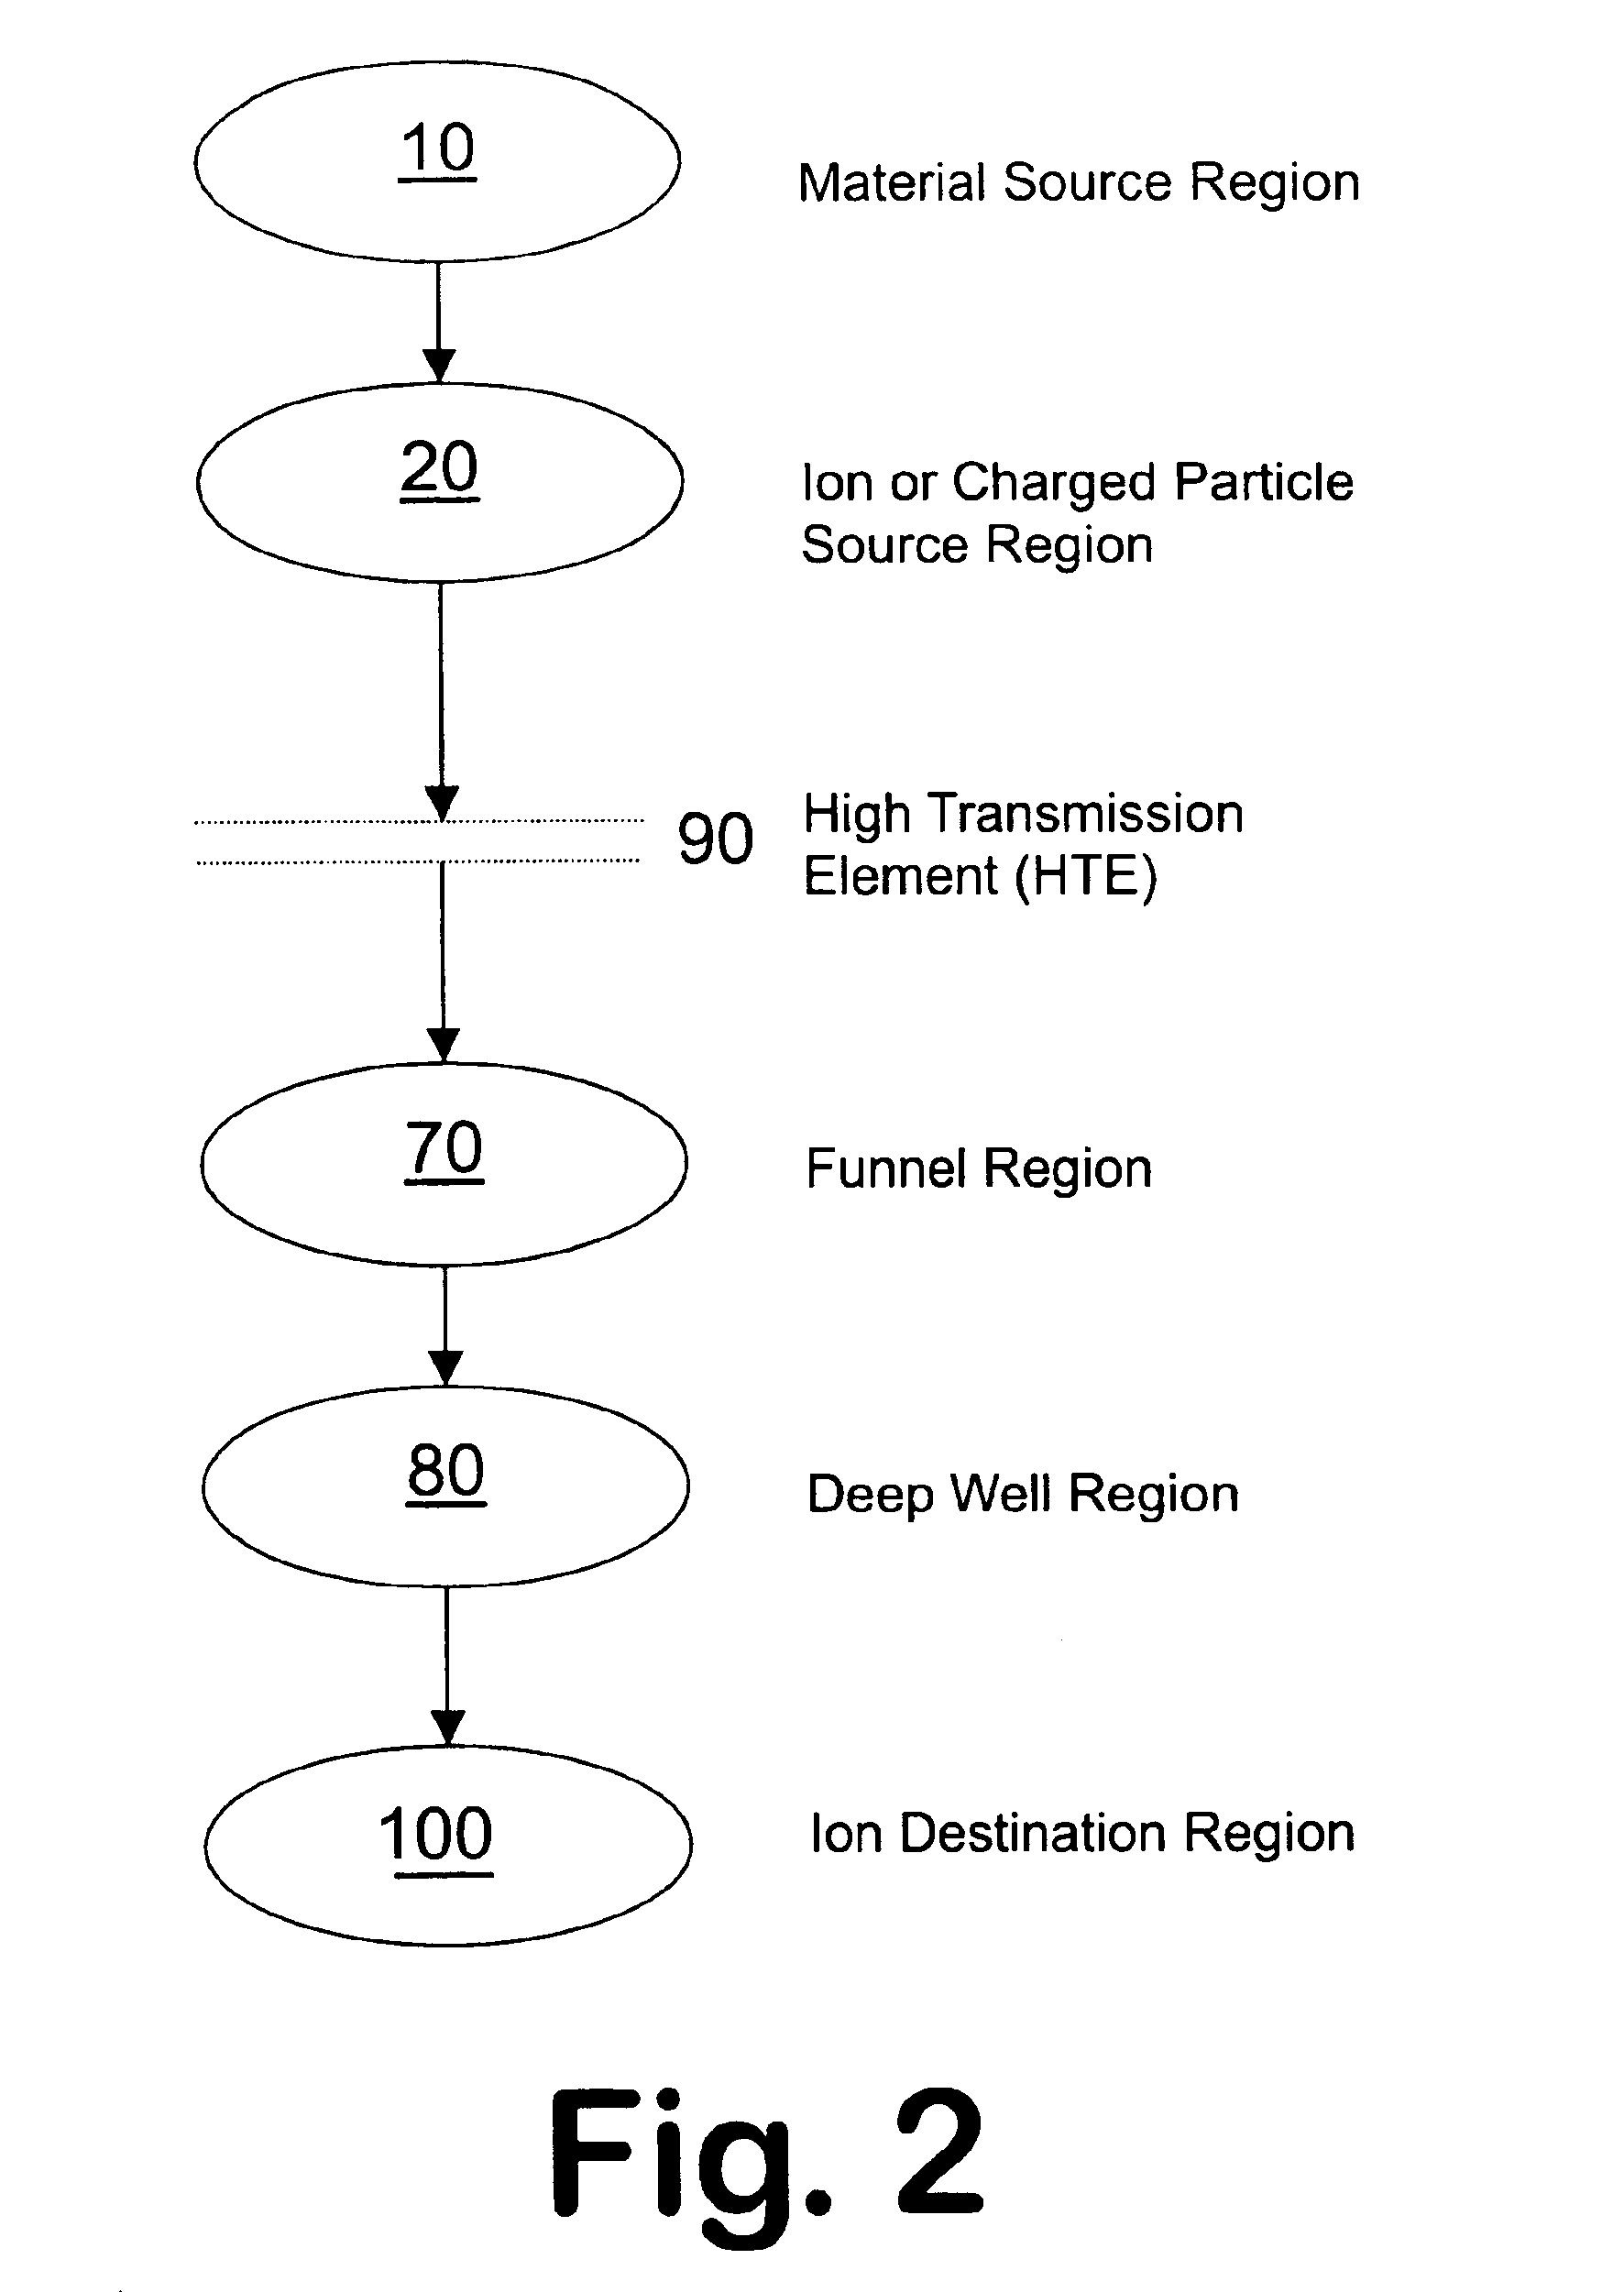 Ion and charged particle source for production of thin films